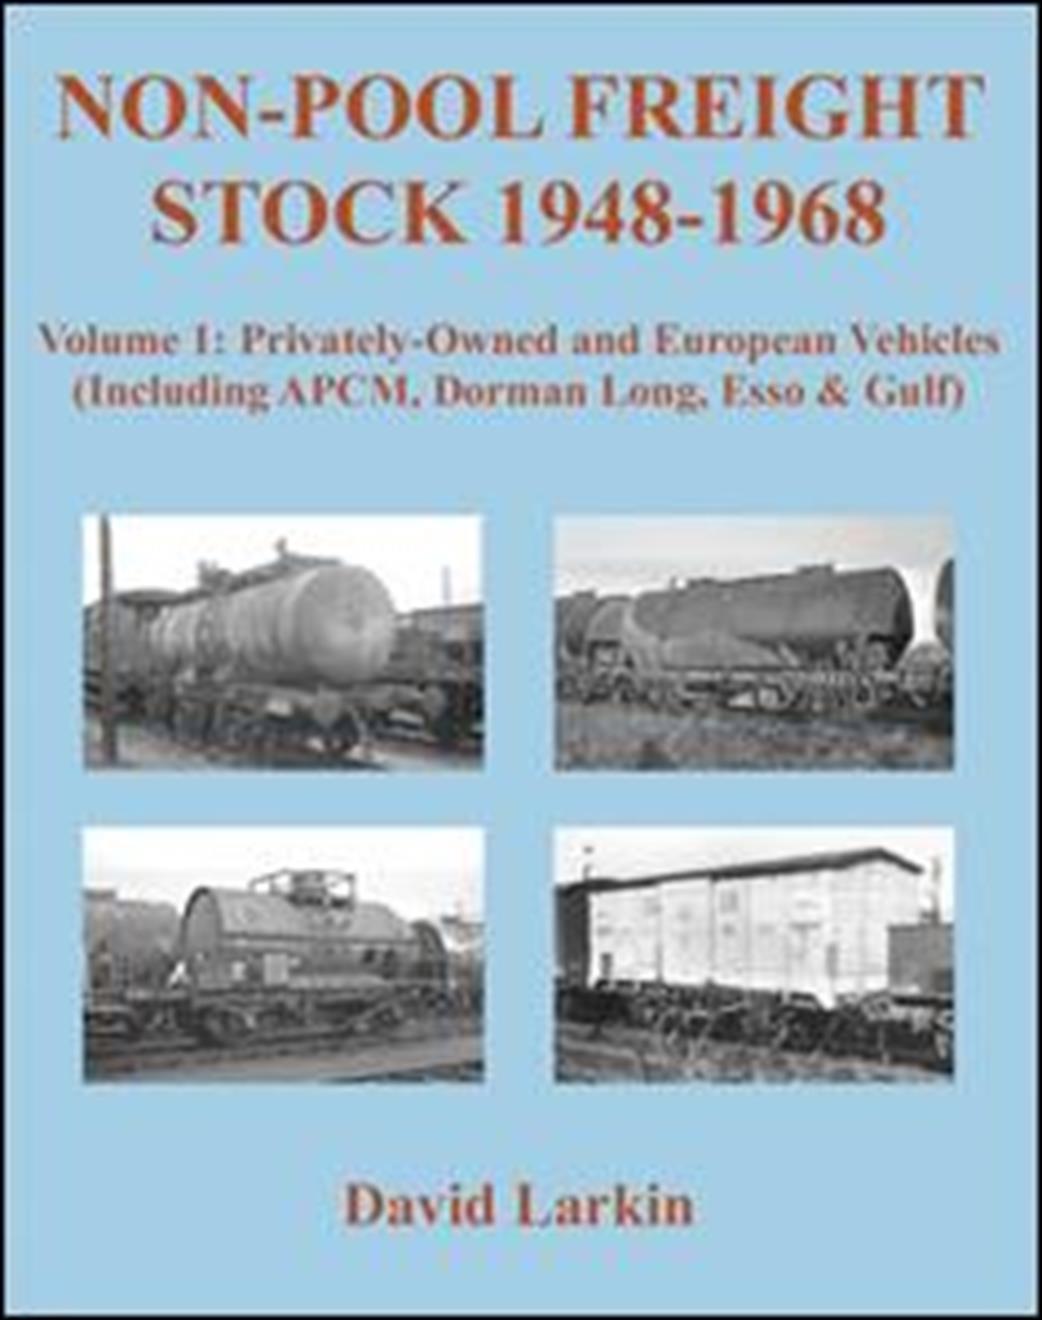 9781905505401 Non-Pool Freight Stock 1948-1968 Volume 1: Privately-Owned and European Vehicles (Including APCM, Dorman Long, Esso & Gulf)